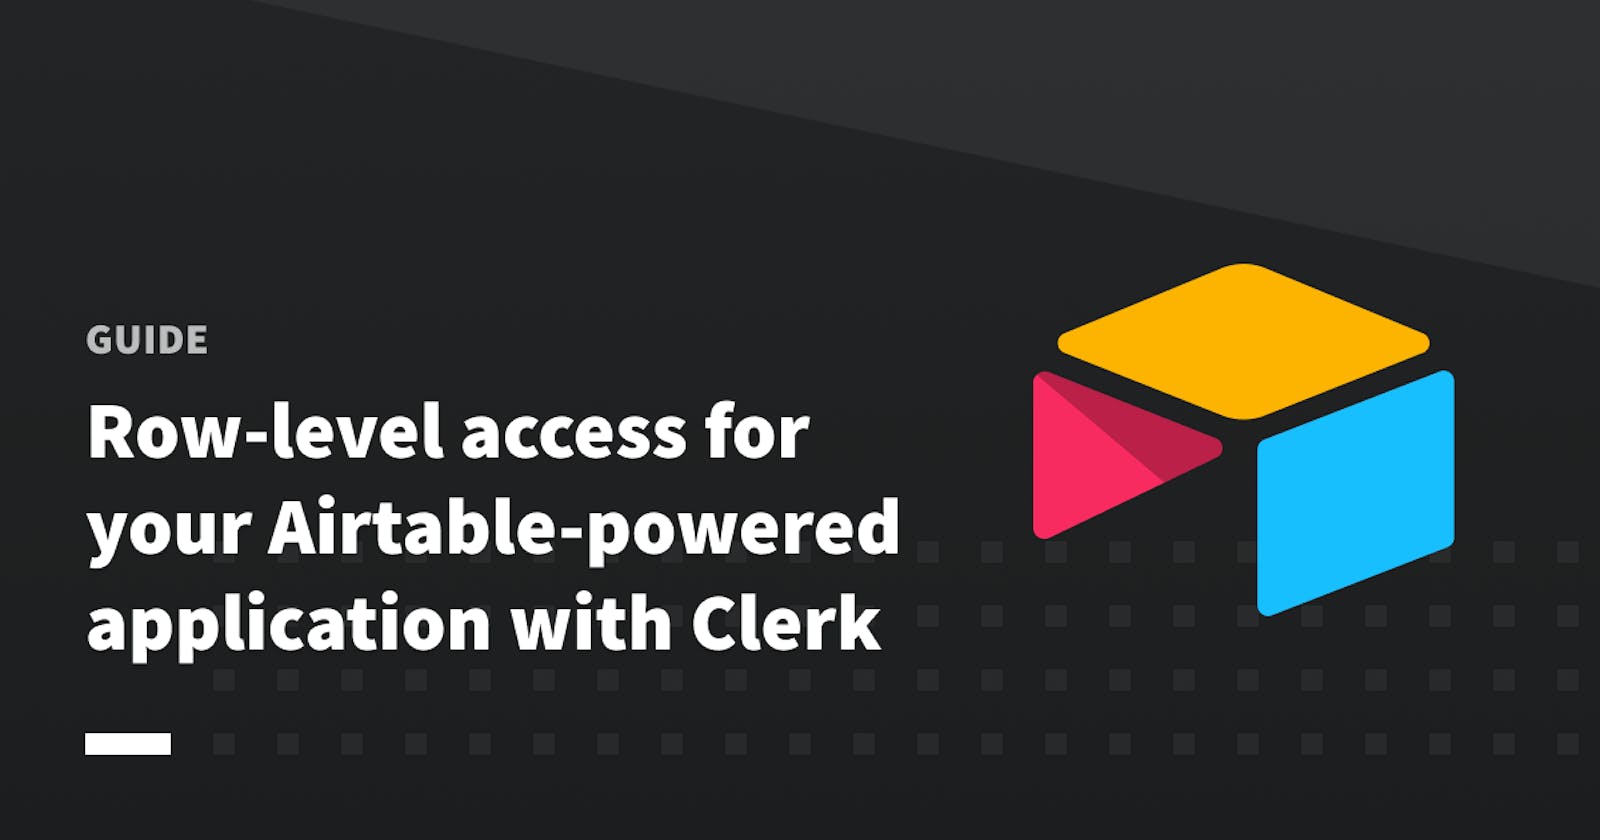 Row-level access for your Airtable-powered application with Clerk